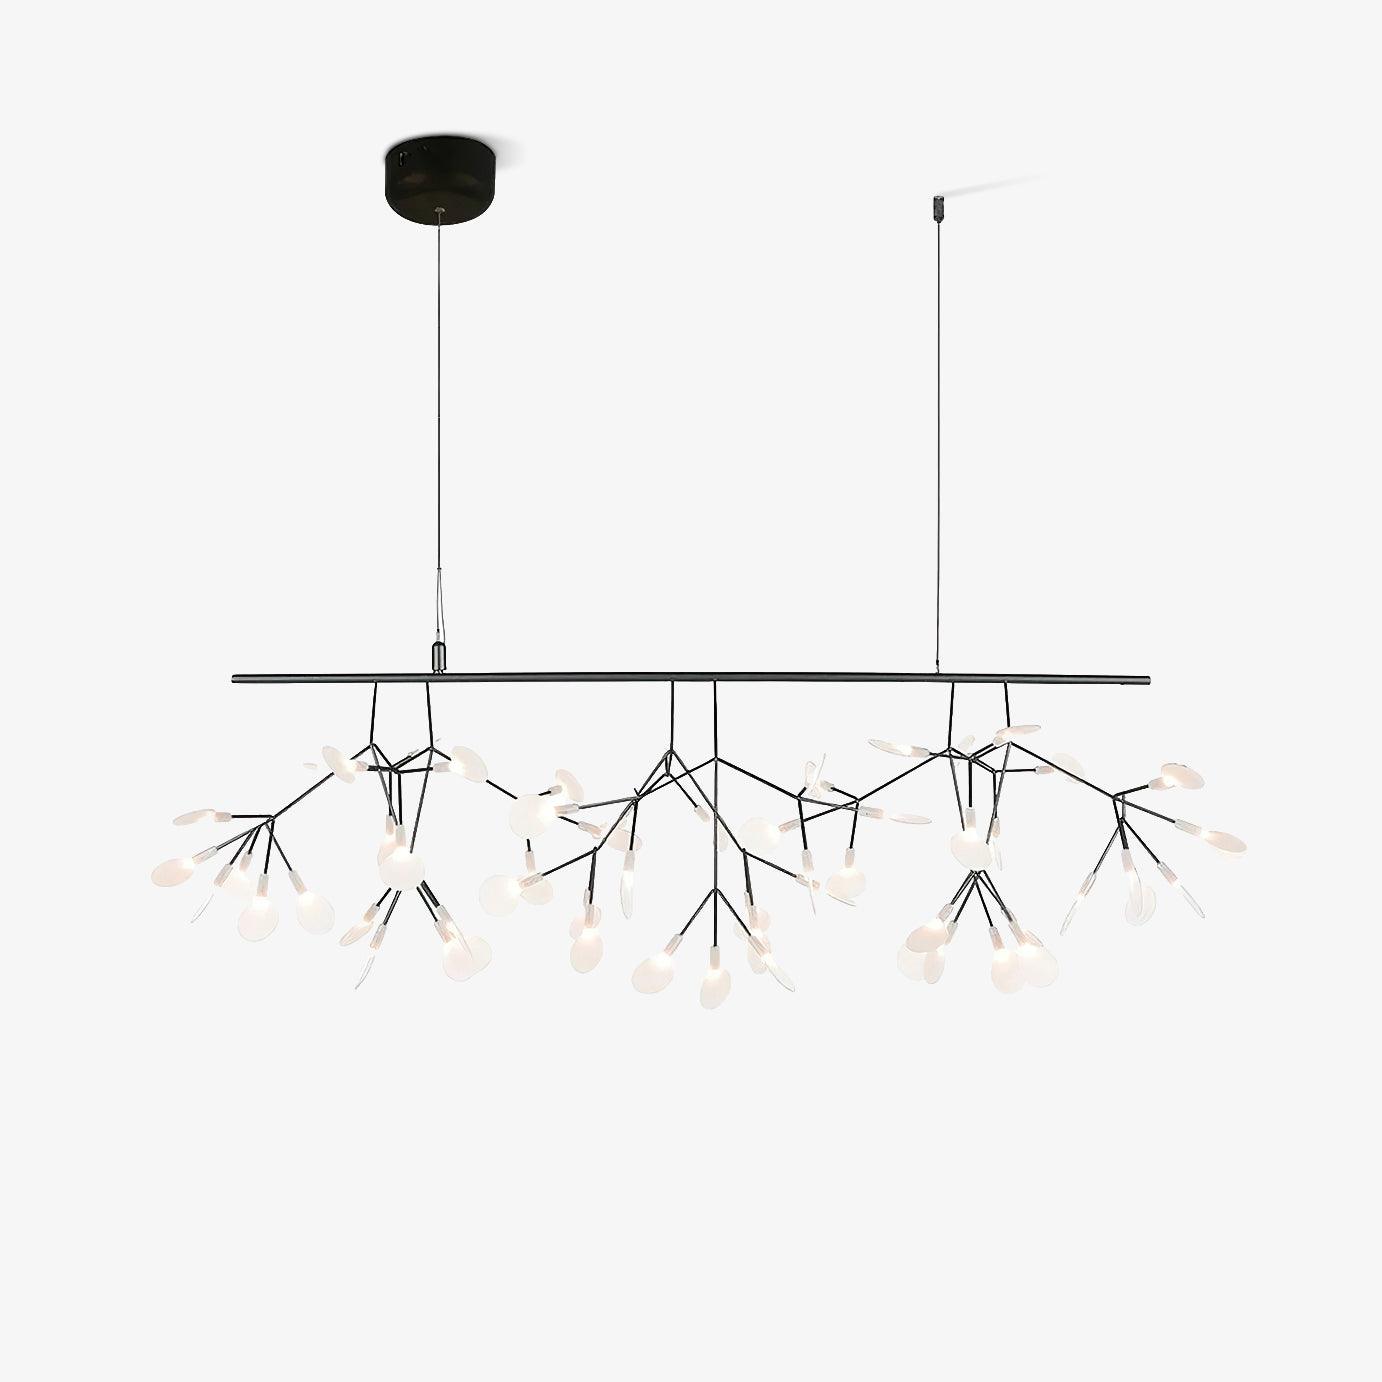 Long Style Firefly LED Chandelier